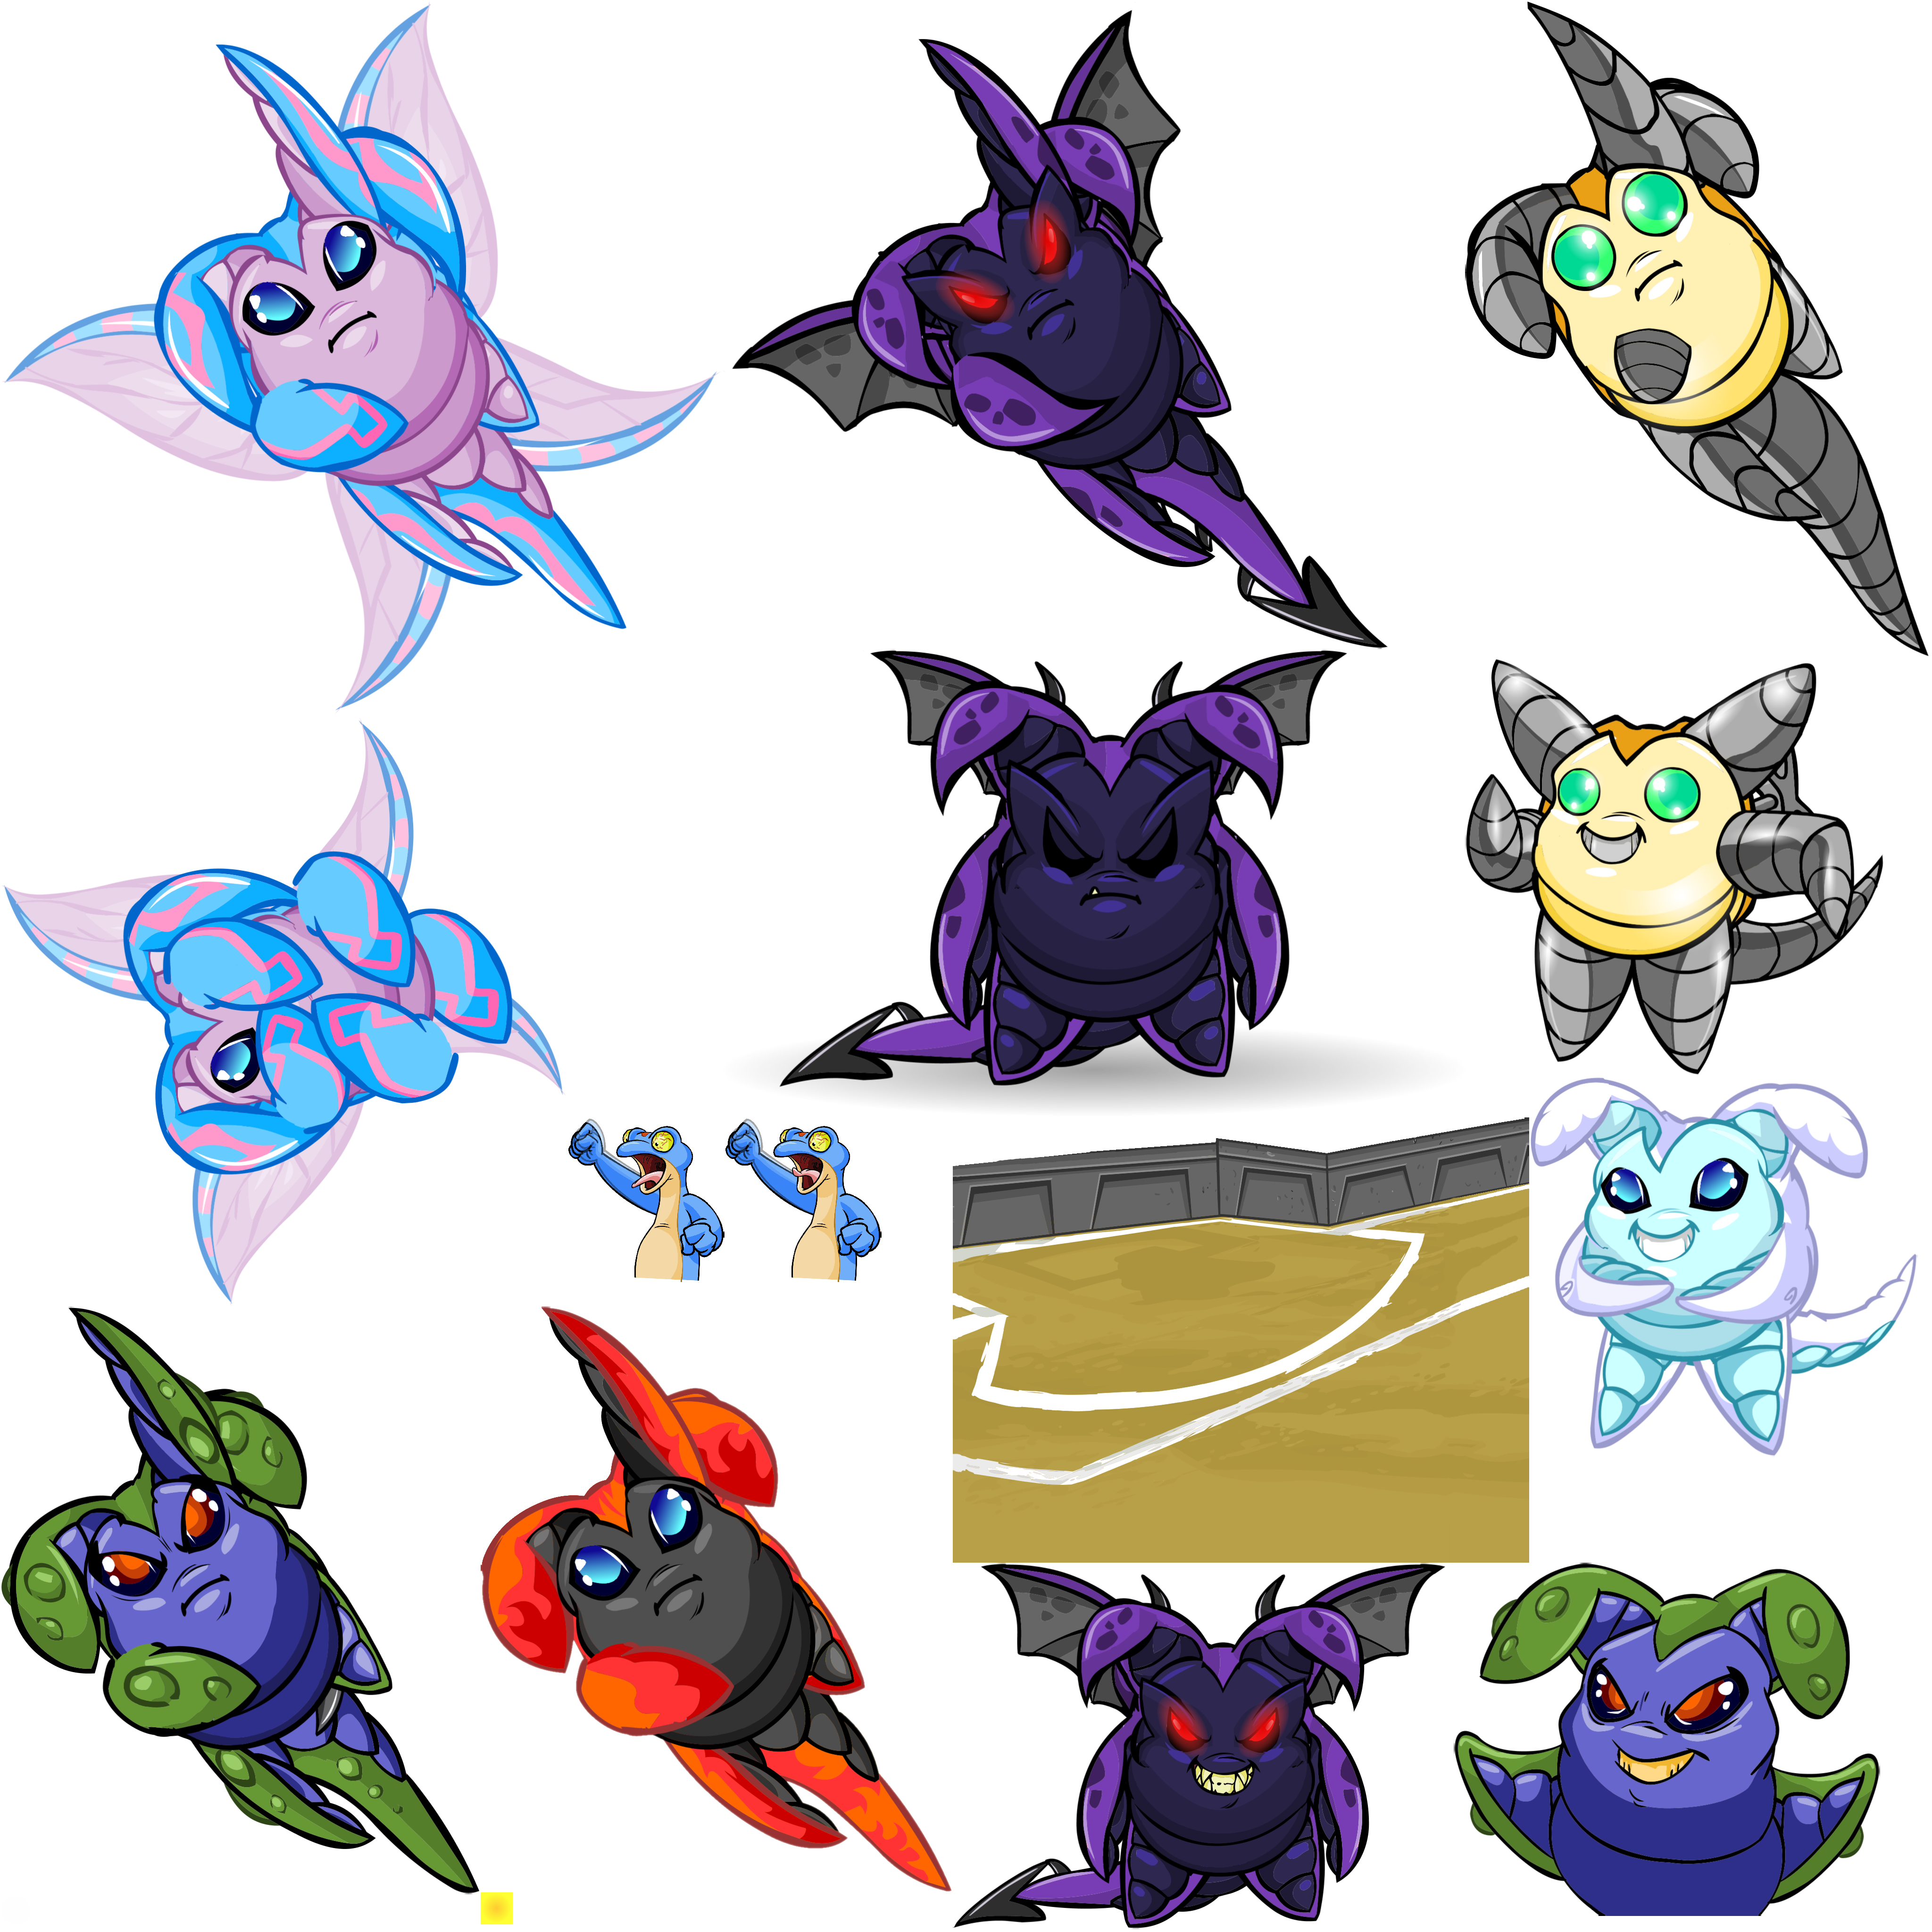 https://images.neopets.com/games/h5/yyb/Yooyuball_texture_67.png